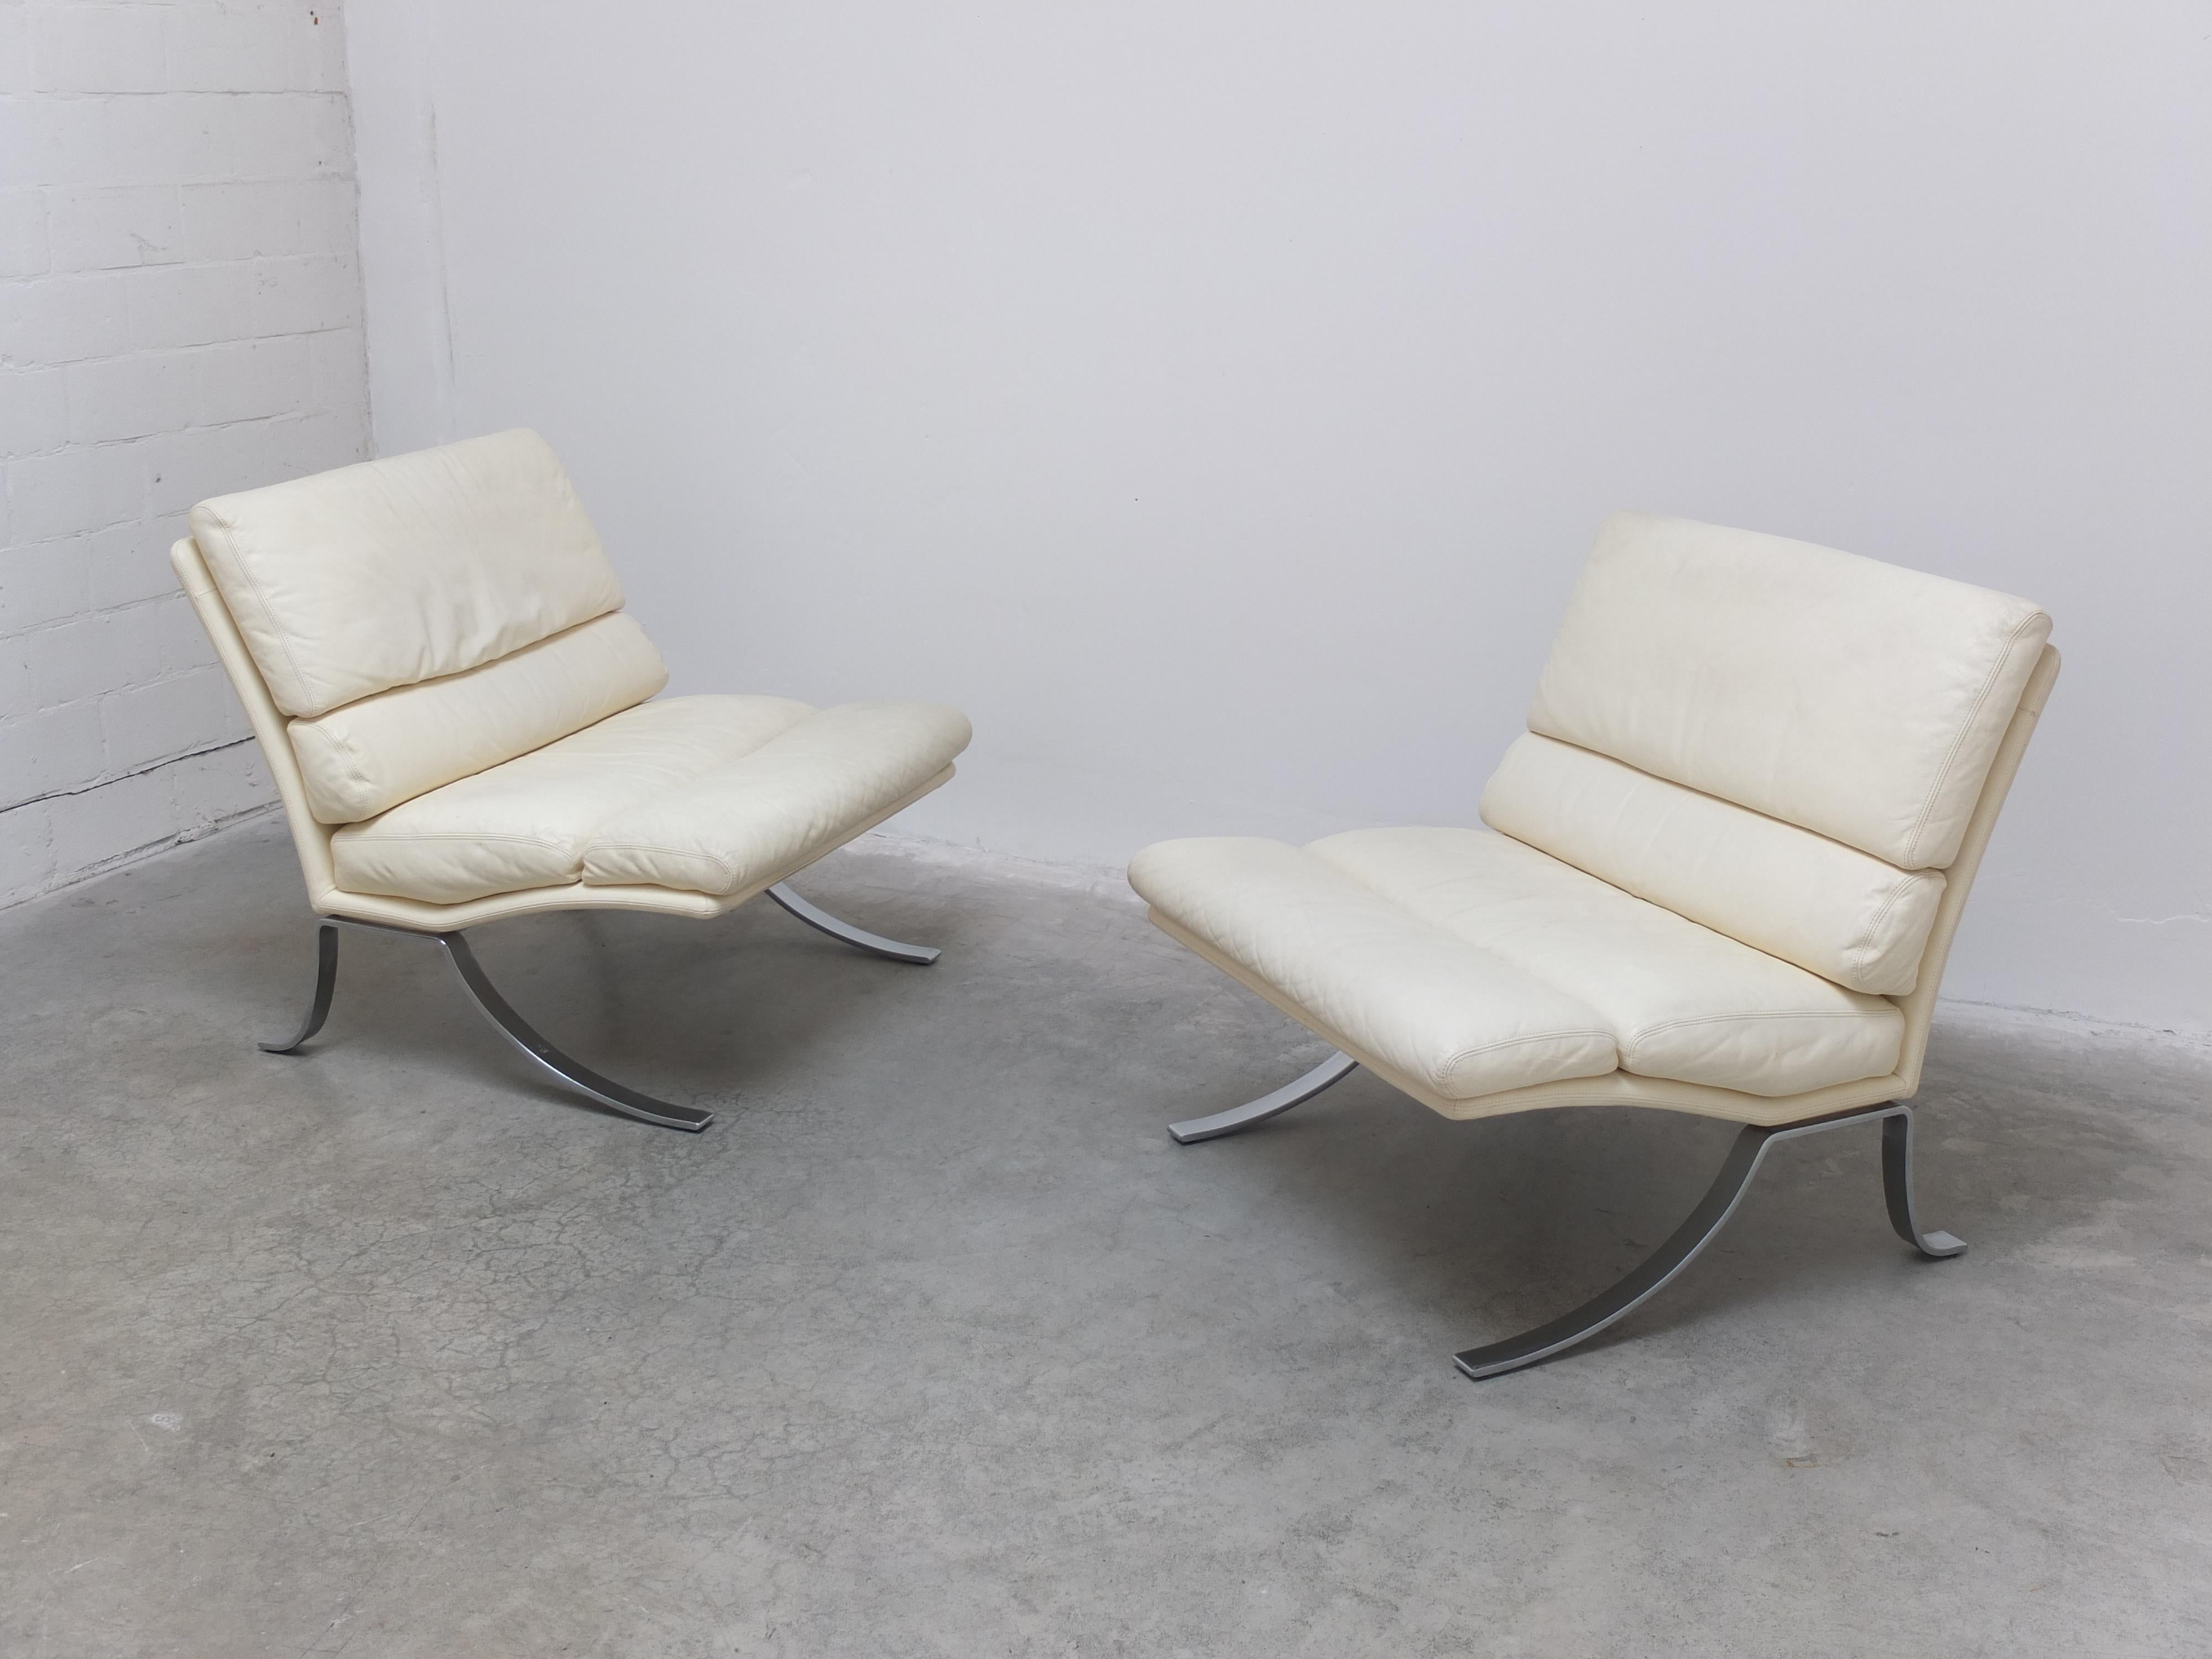 Late 20th Century Rare Pair of Belgian Modernist Lounge Chairs with Ottoman by Durlet, 1970s